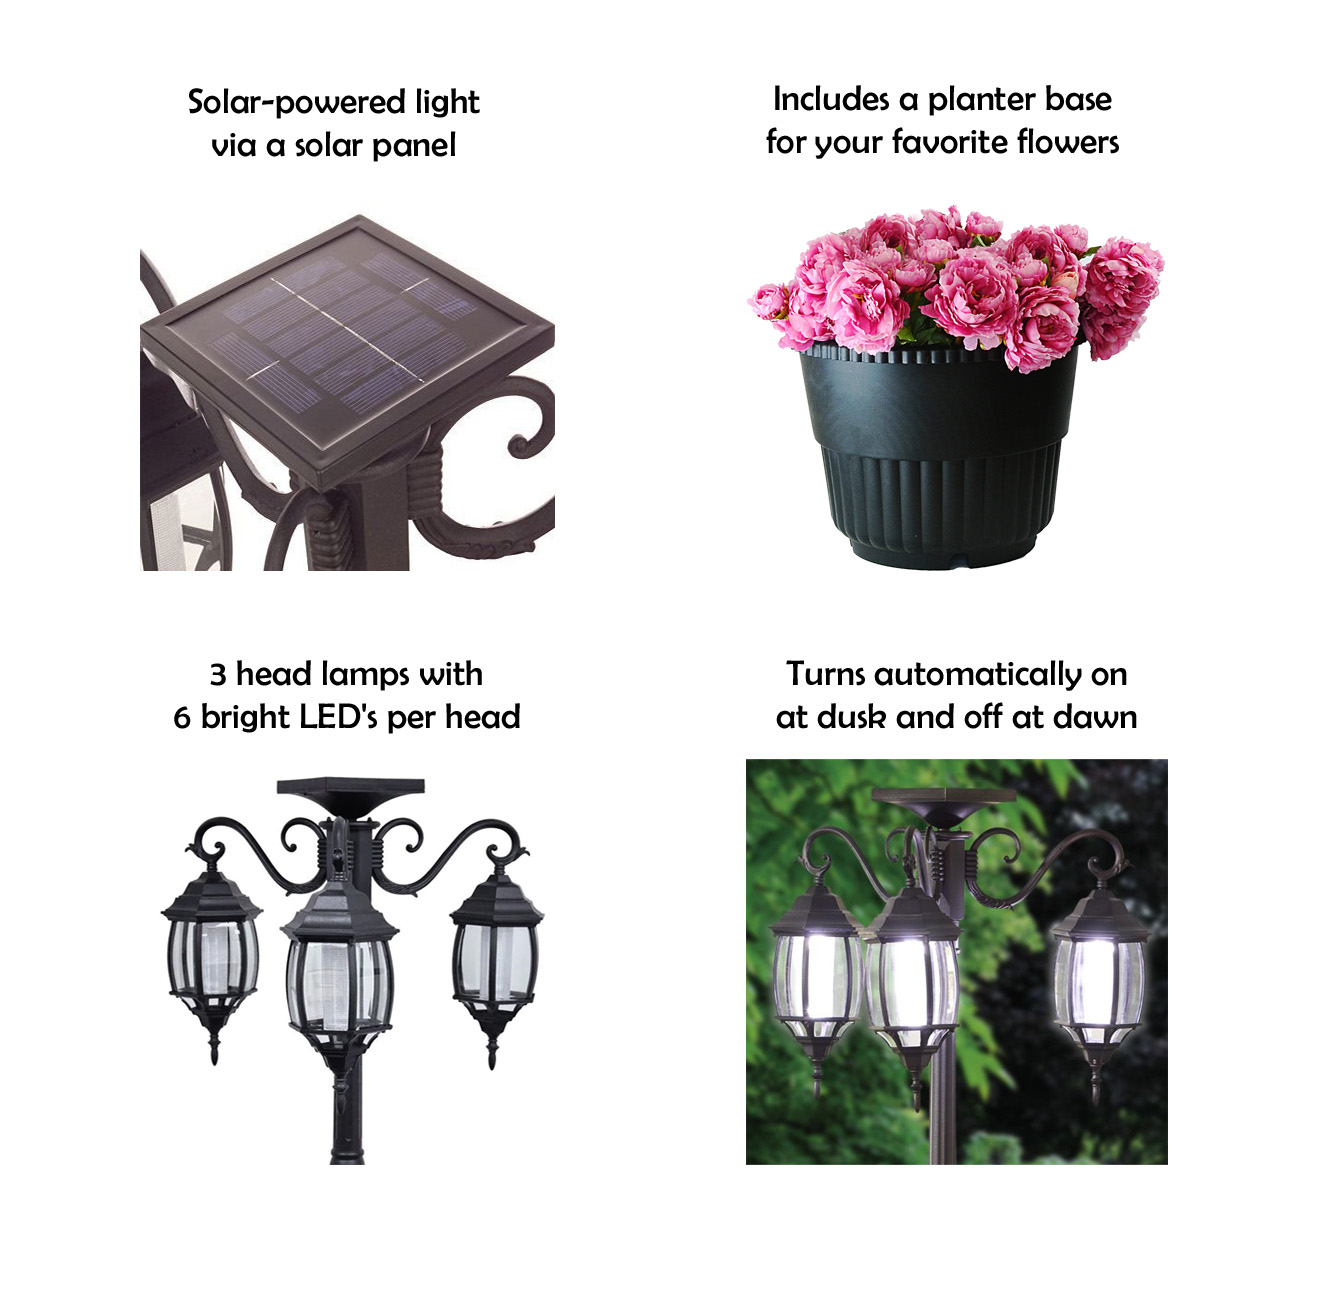 Westcharm 6.6 ft. (79 in.) Tall Black Solar Powered Lamp Post with Round  Planter for Garden, Heads, White LEDs